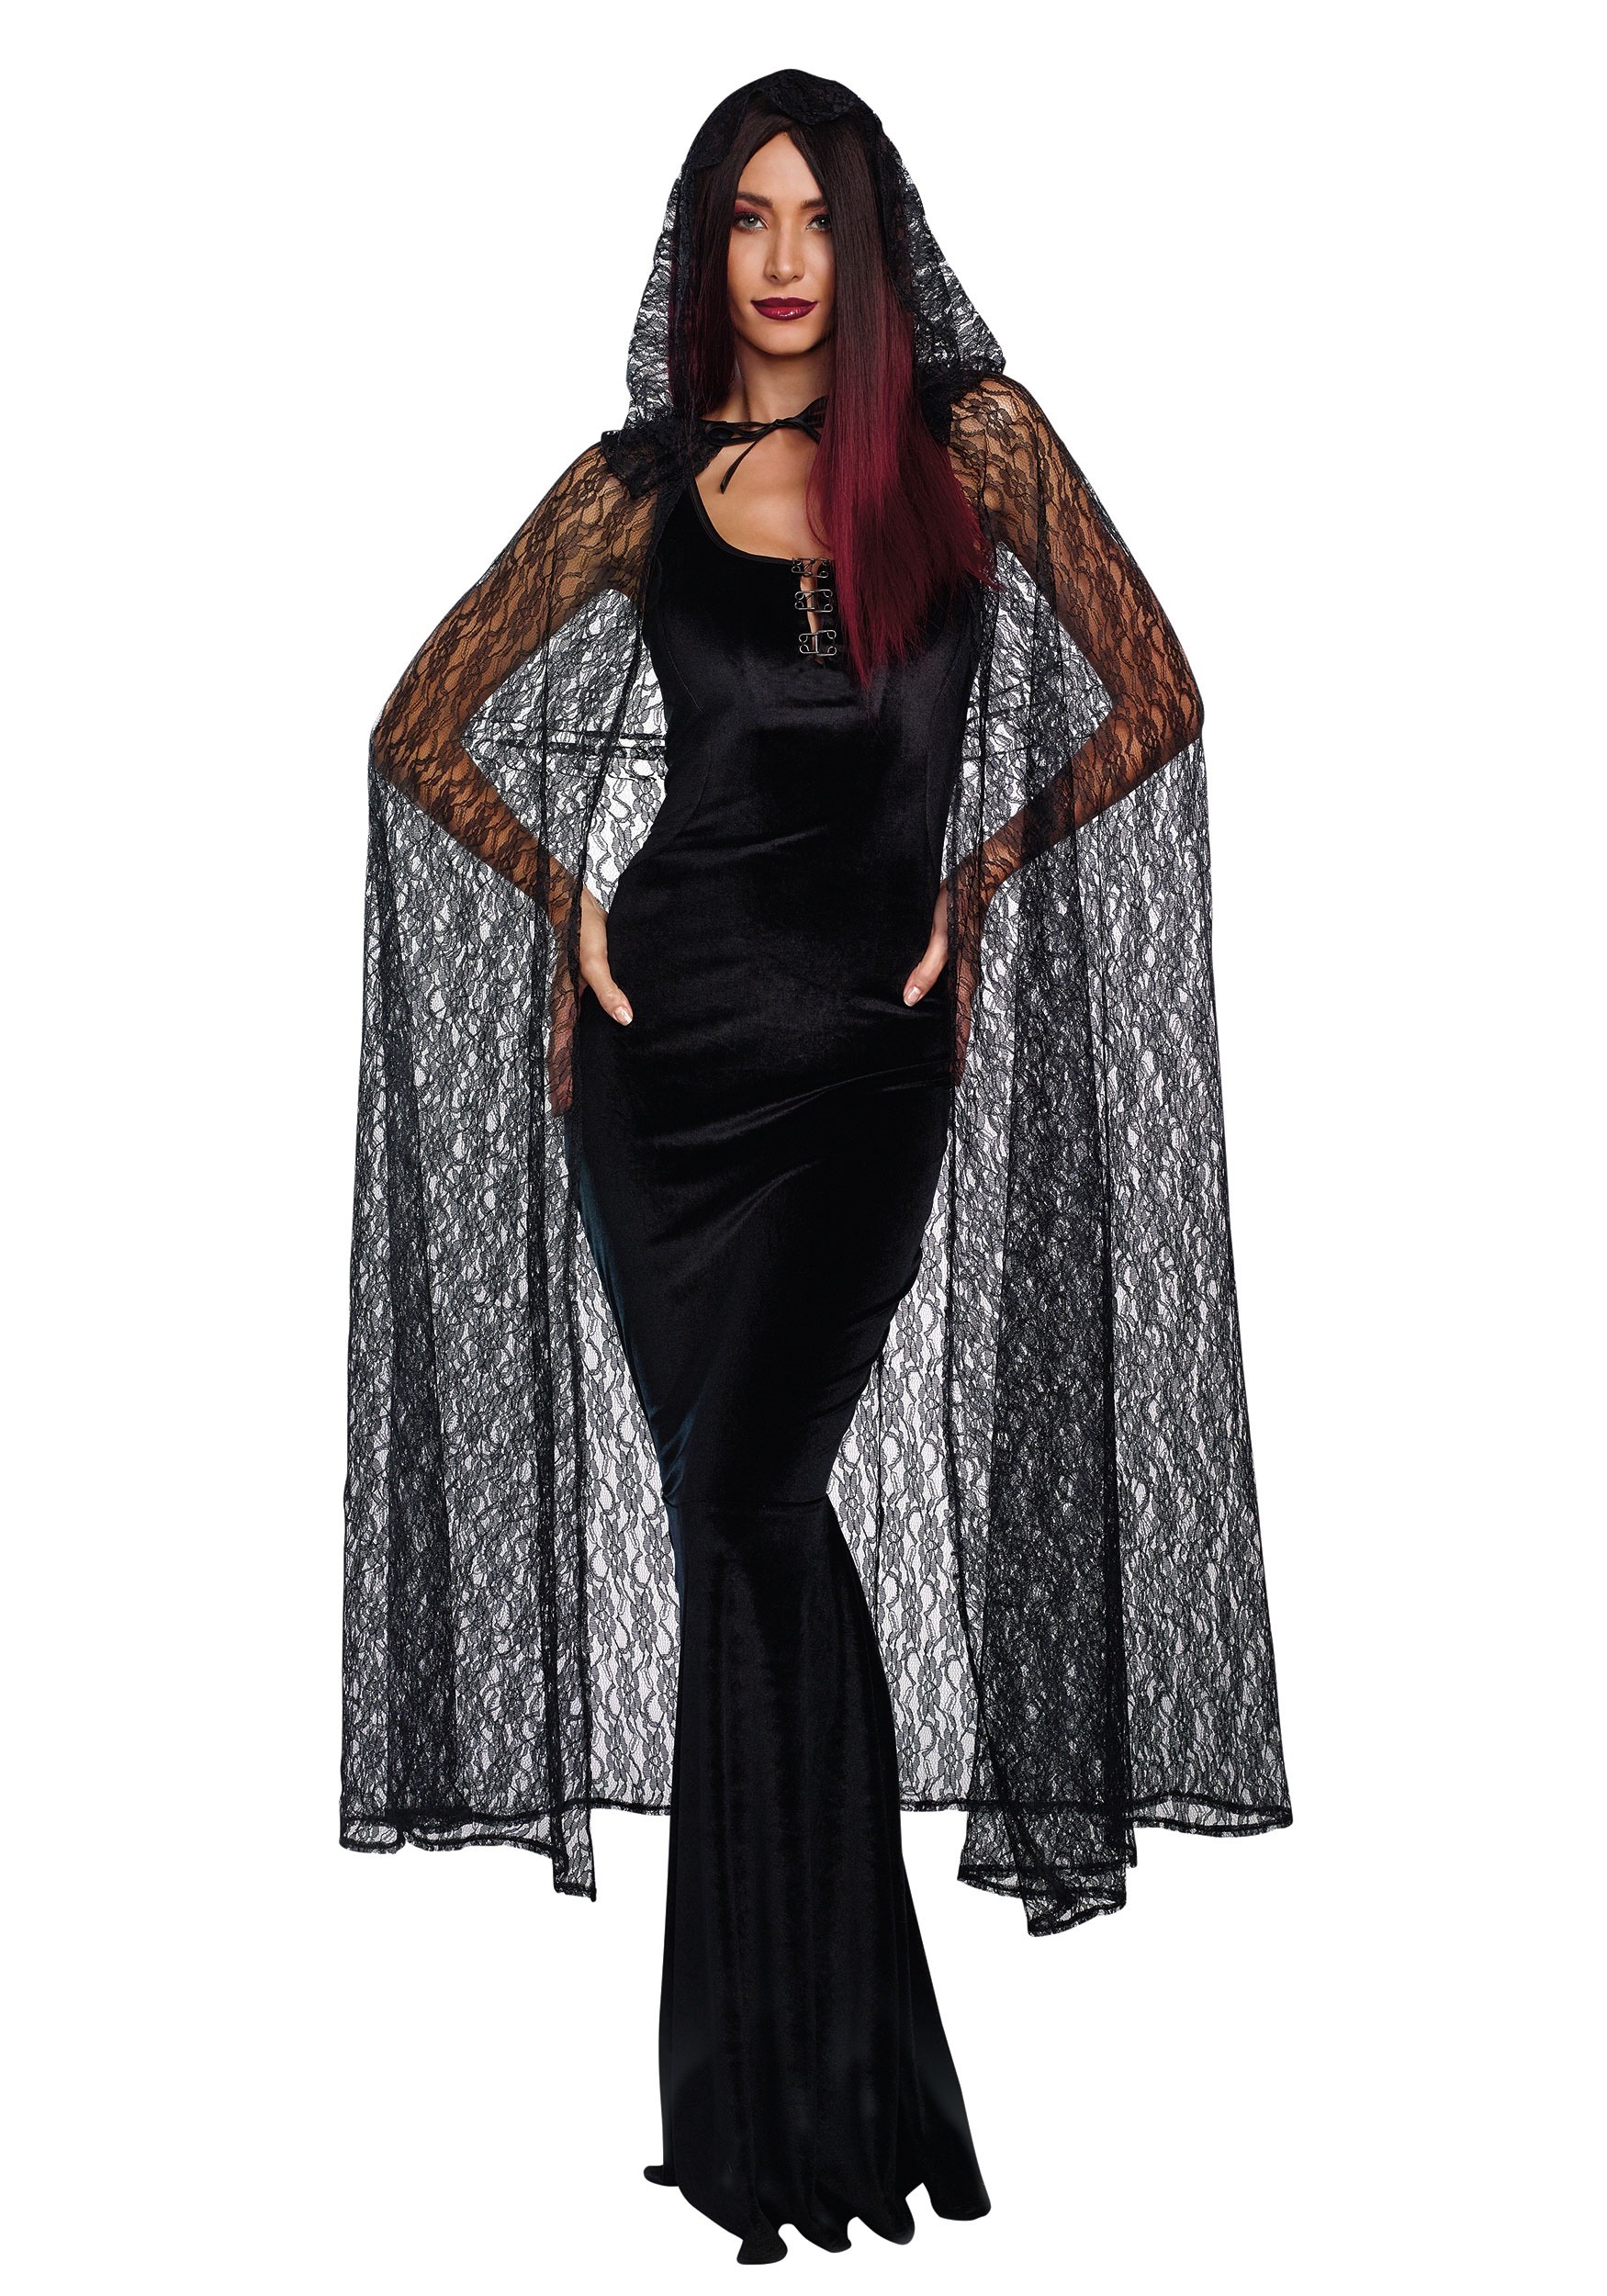 Ladies Black & Red Coffin Cape Halloween Fancy Dress Accessory One Size Fits All 